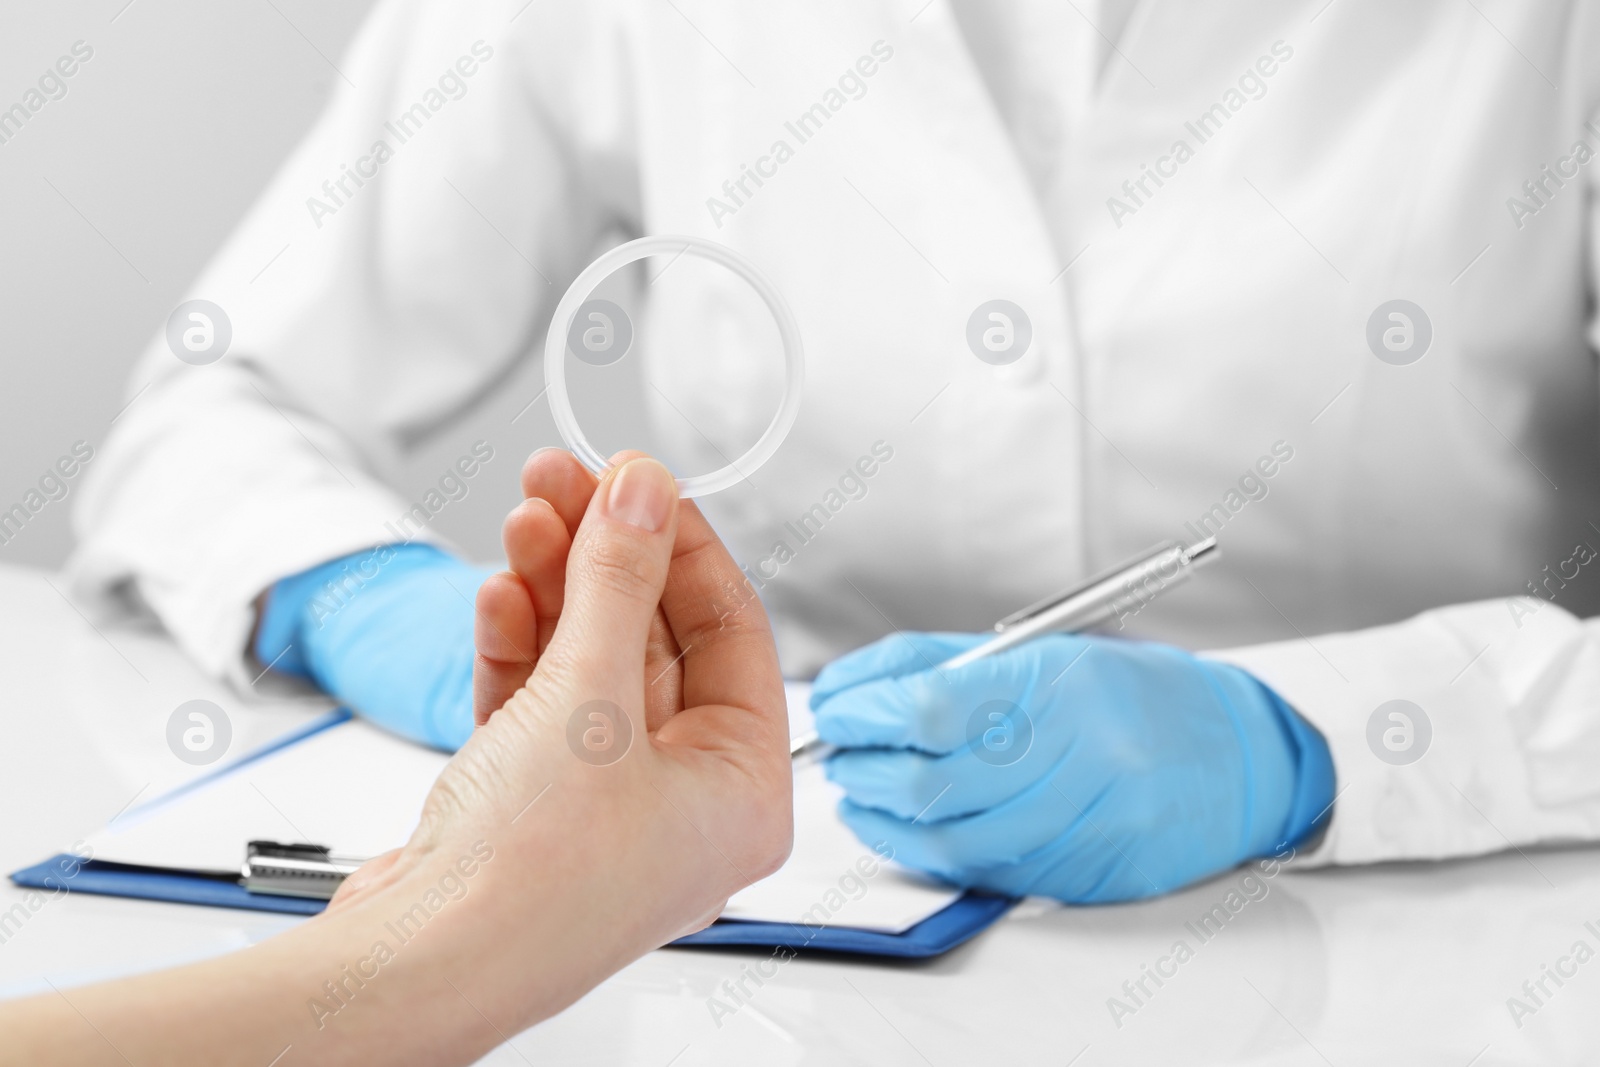 Photo of Woman holding diaphragm vaginal contraceptive ring at the doctor's appointment, closeup